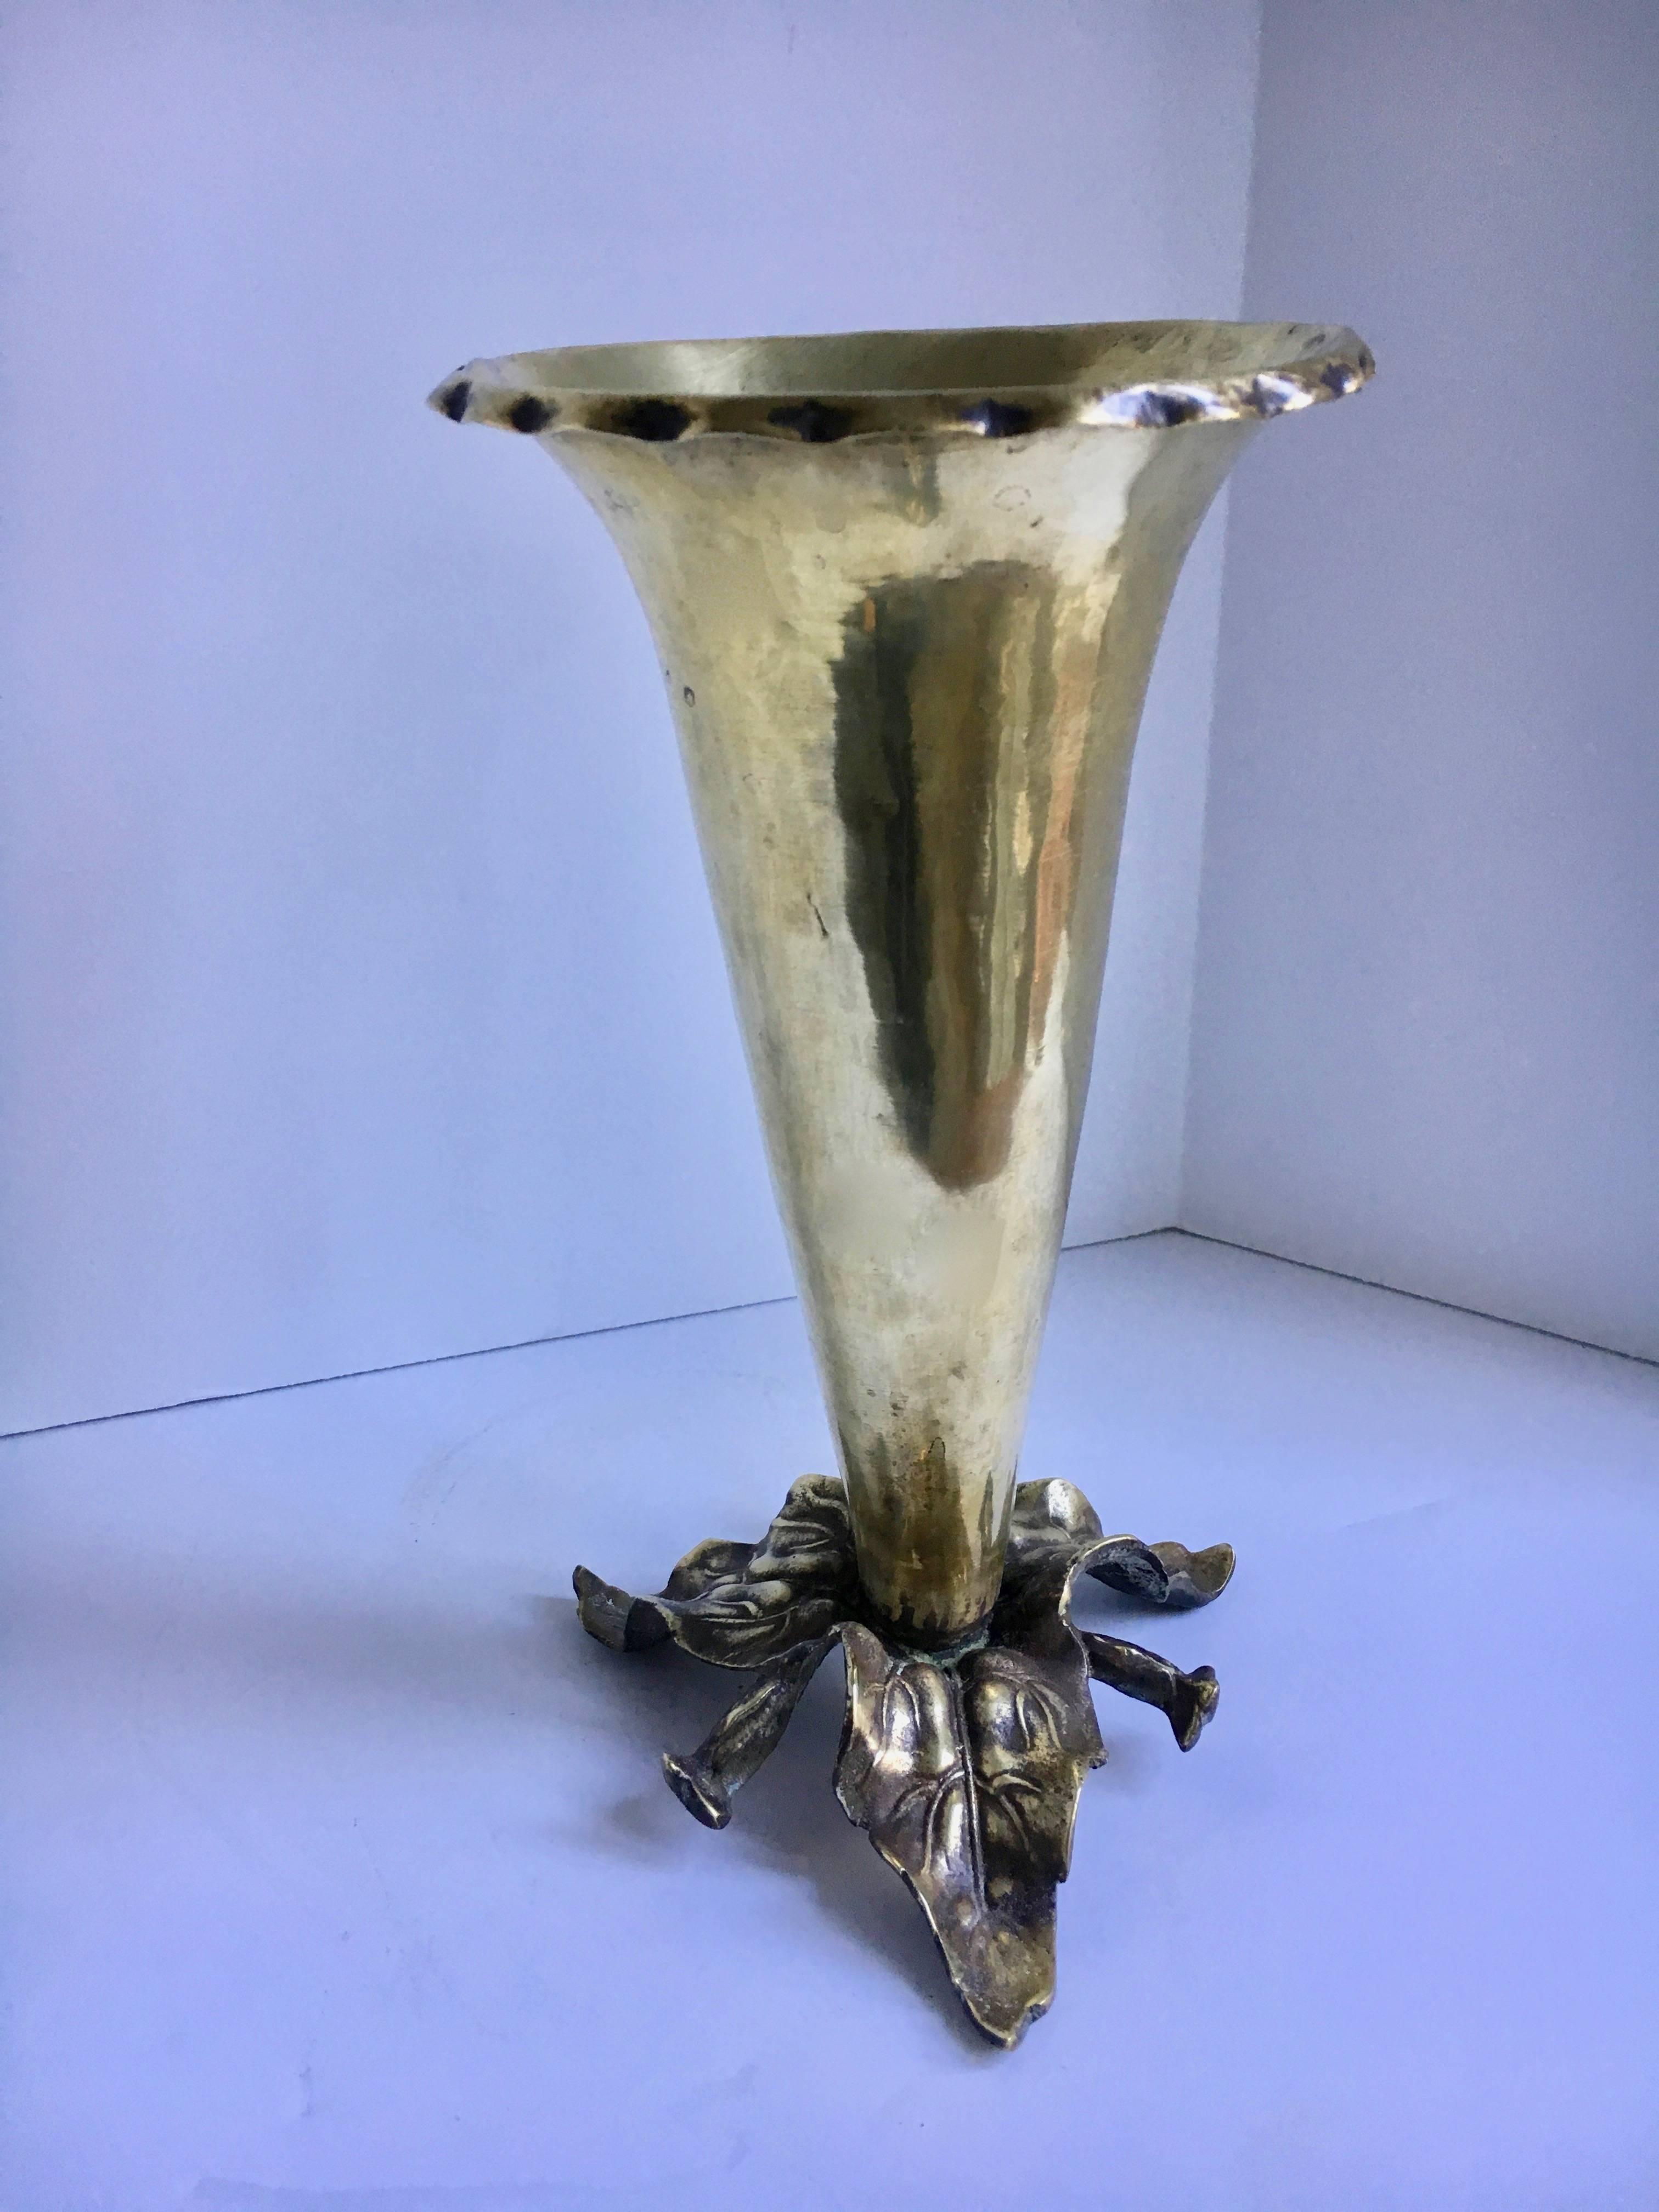 Brass vase with sculpted leaves base - a lovely vase for any room - a trumpet style vase with leaves as the base that holds the vase in place.